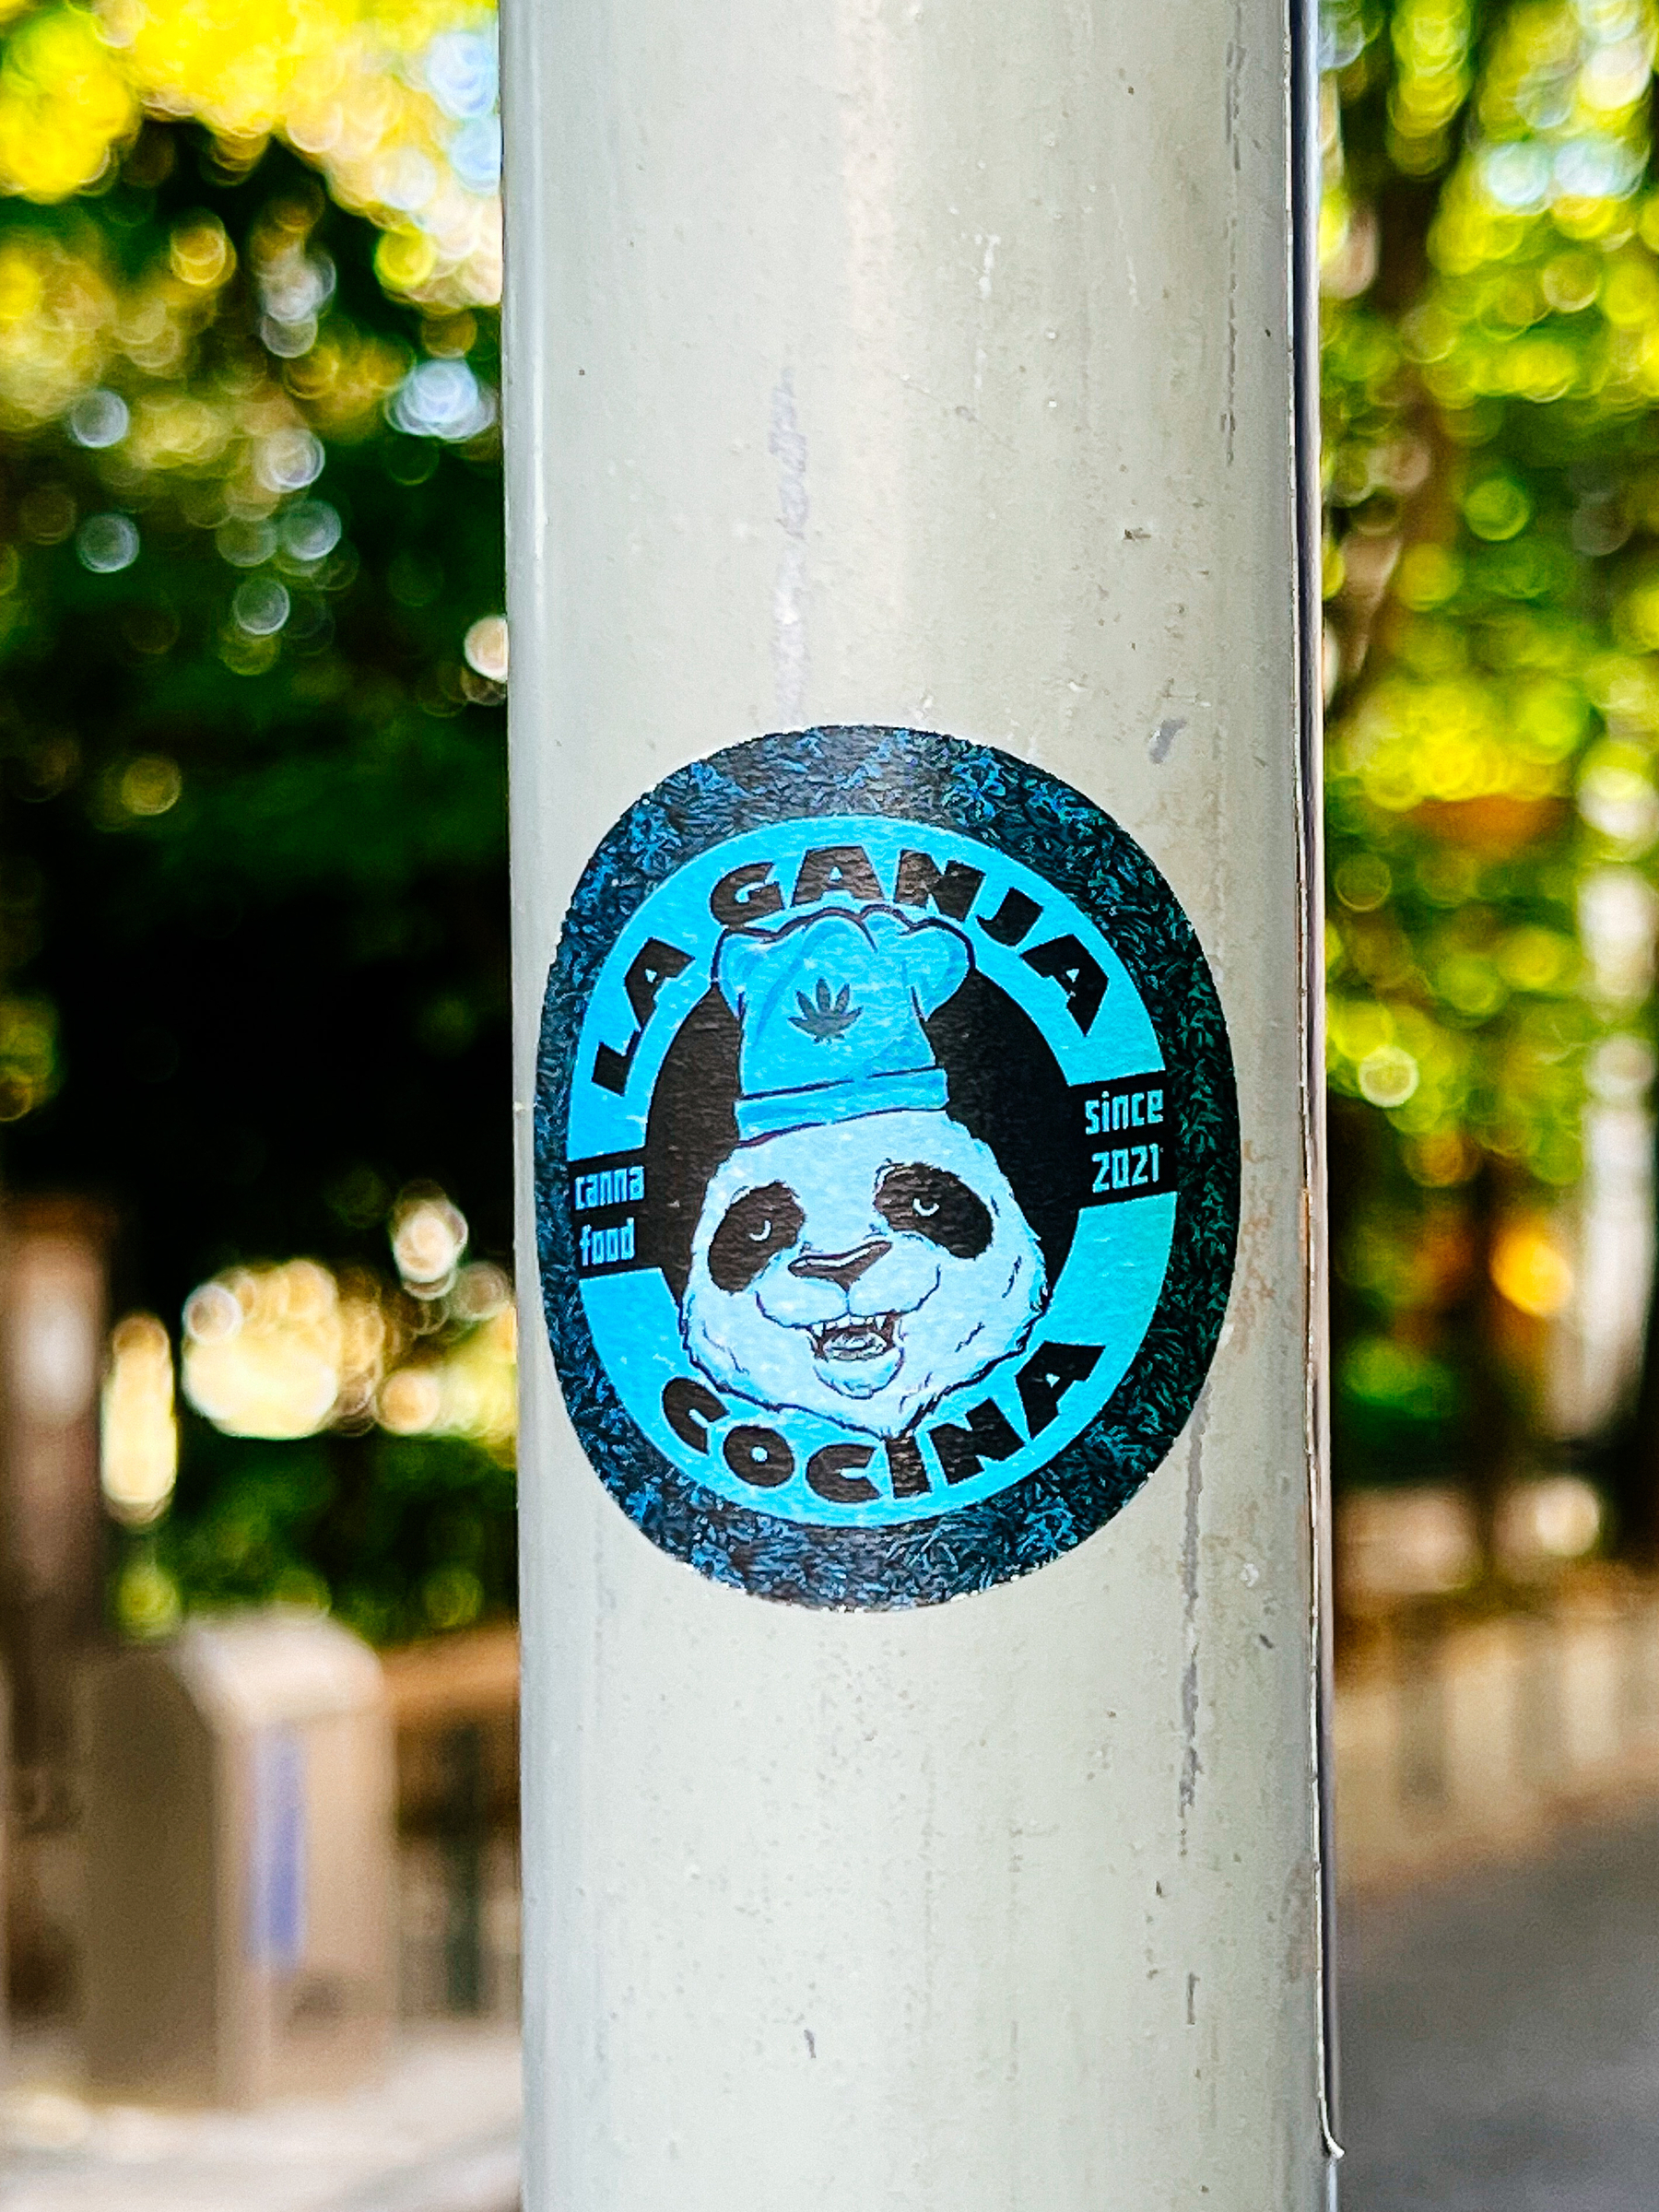 A sticker for “La Ganja Covina”, showing a very high panda with a hemp leaf on his chef’s hat. 